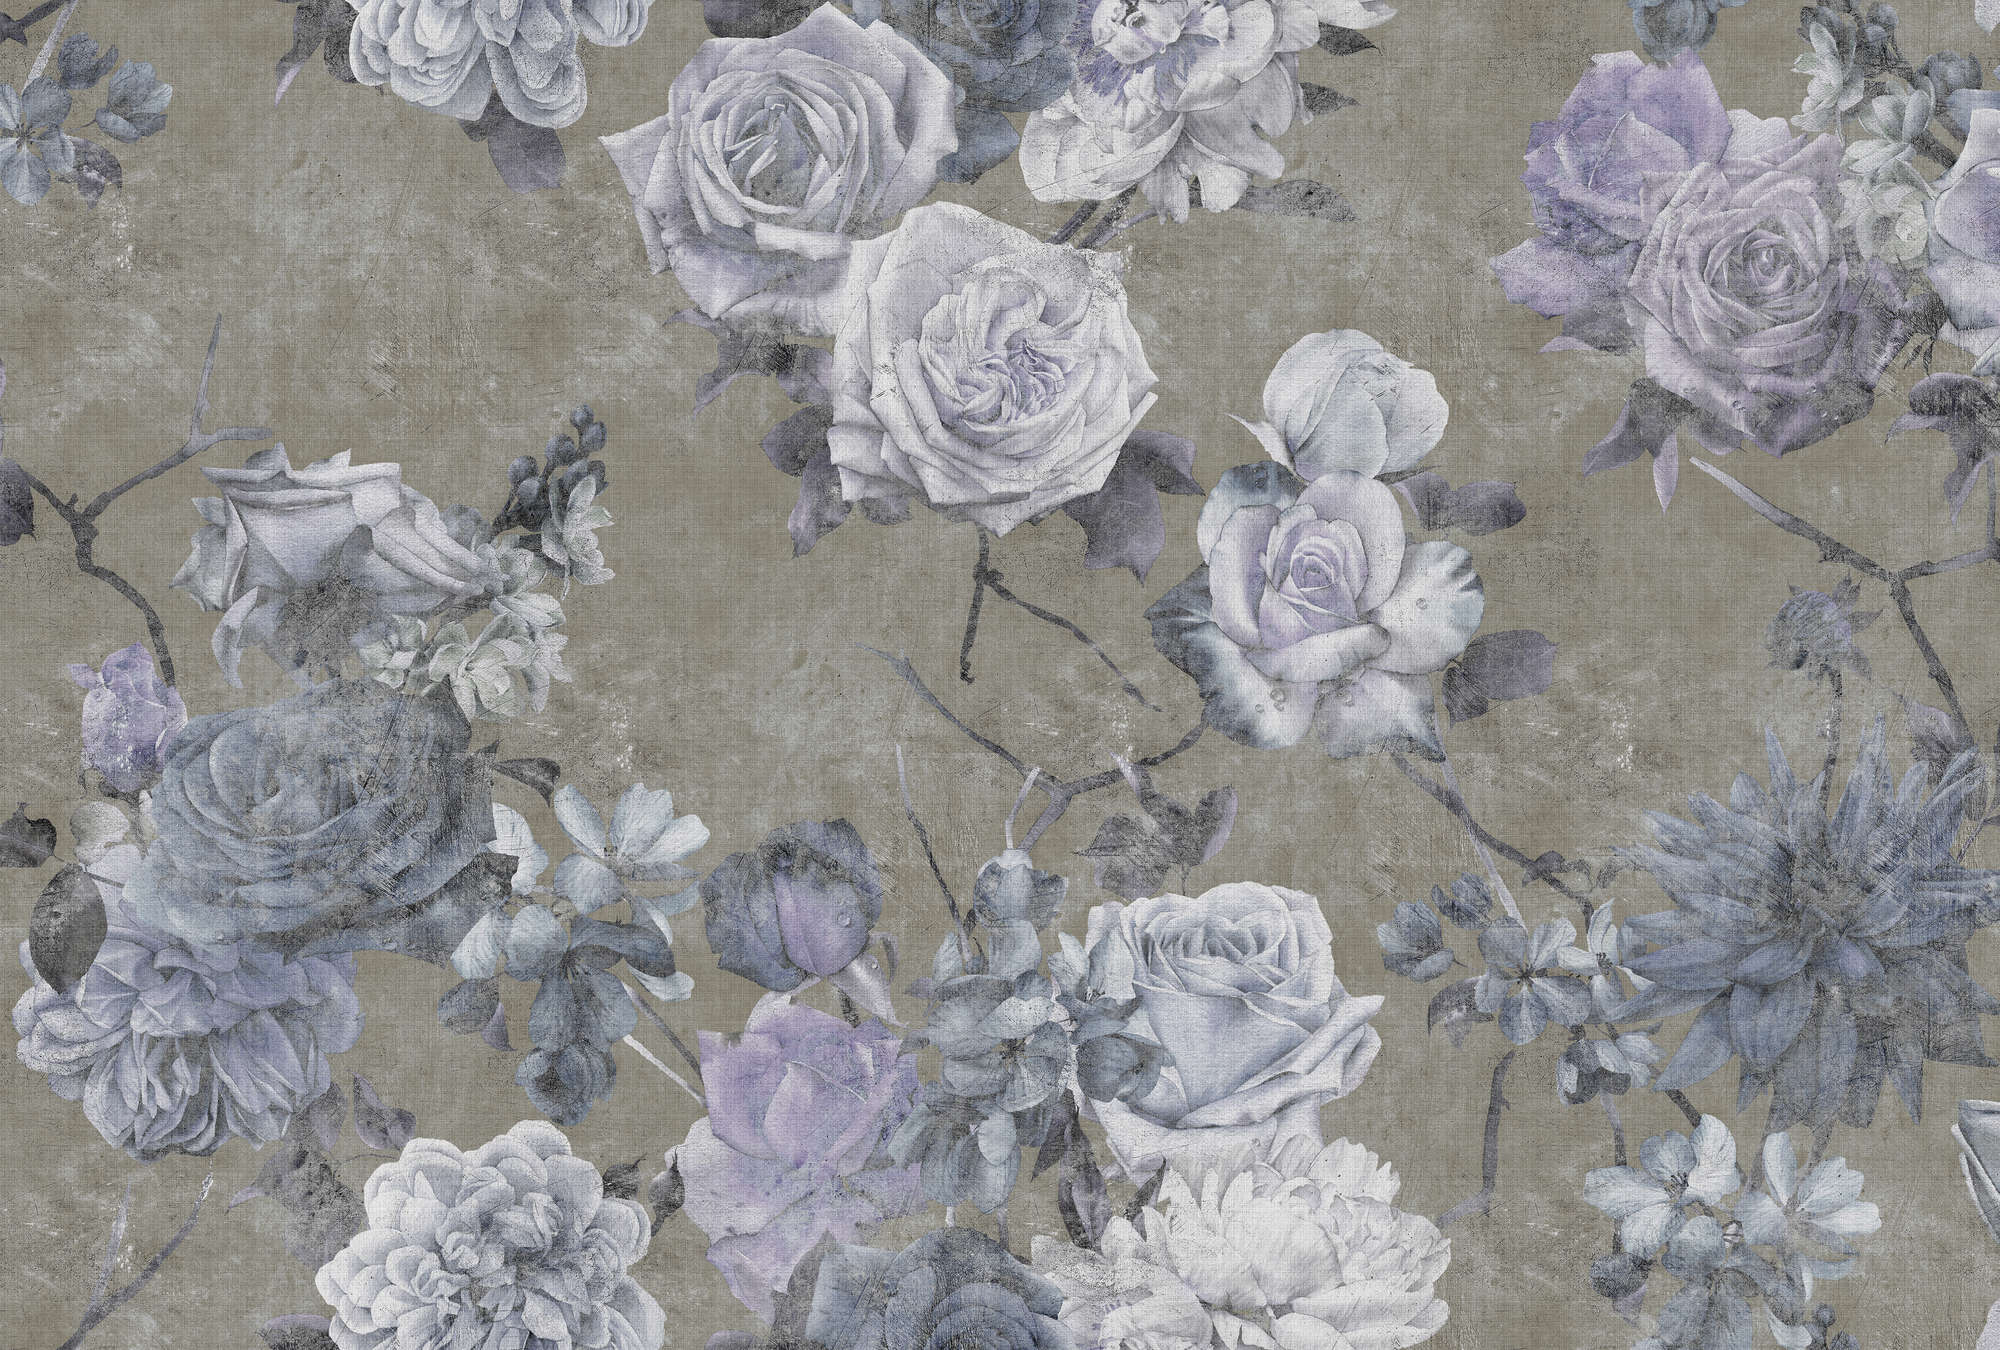             Sleeping Beauty 1 - wallpaper in natural linen structure rose blossoms in used look - blue, taupe | structure non-woven
        